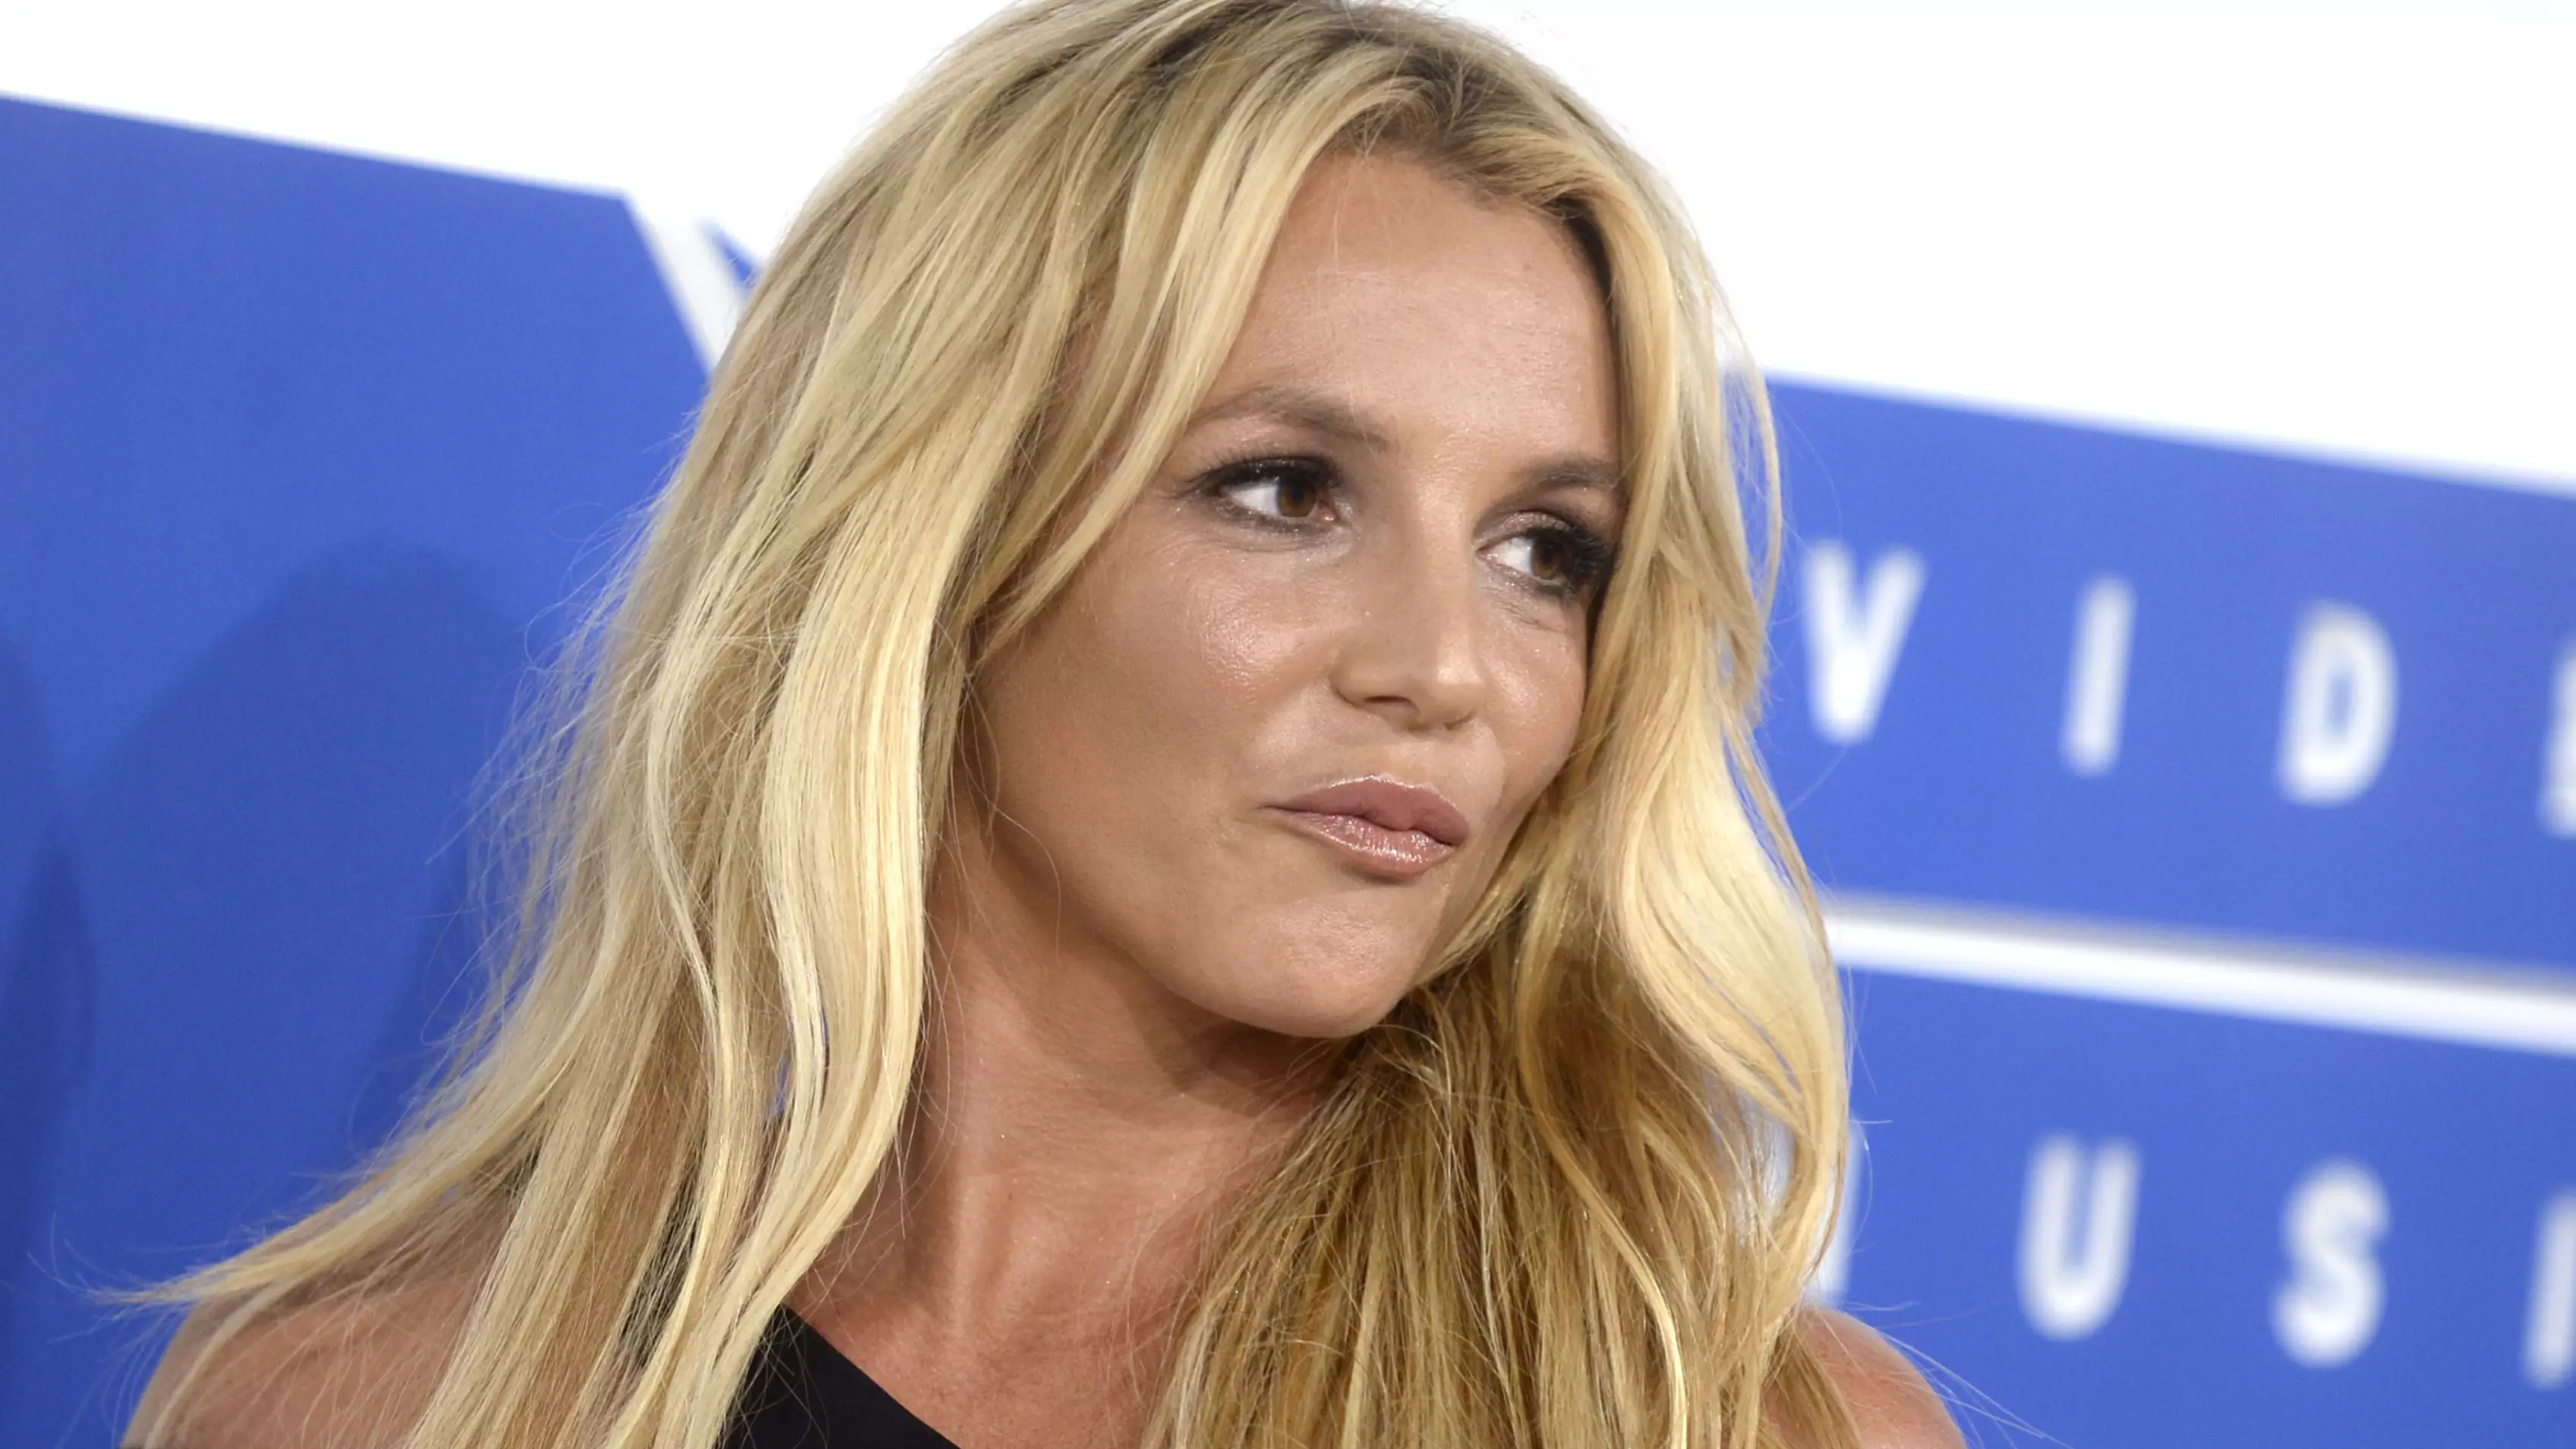 Britney will appear in court to speak about her conservatorship (